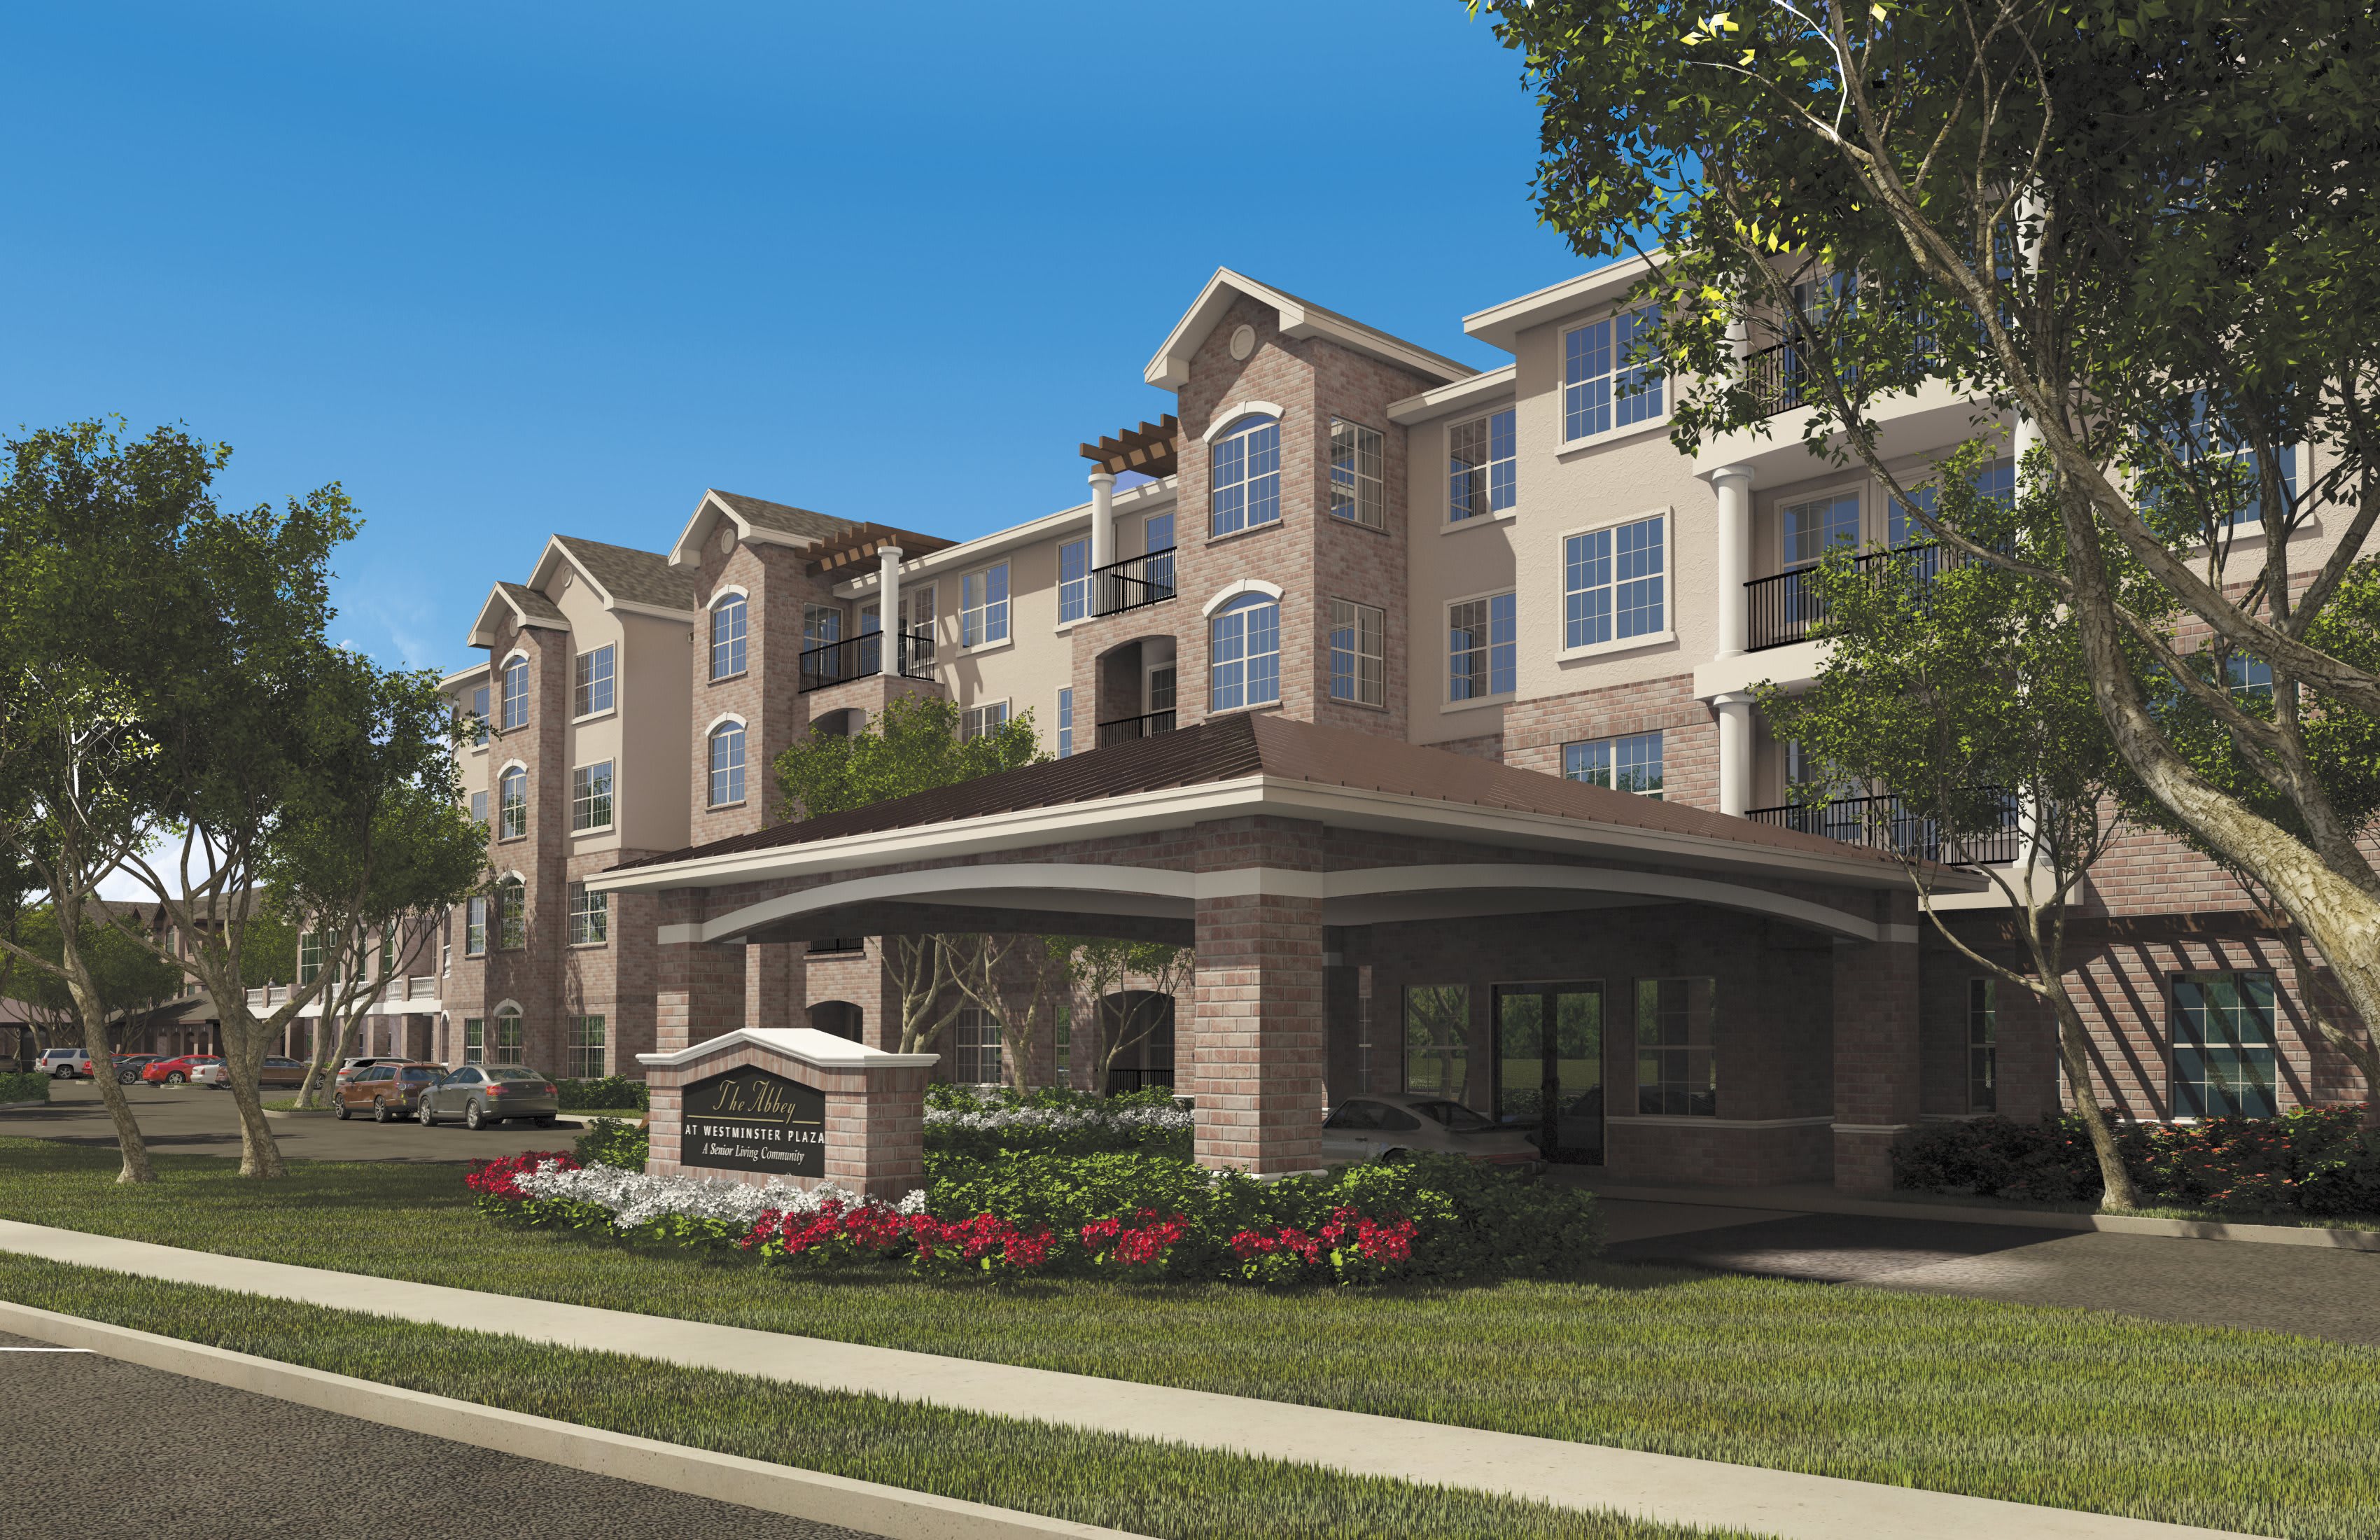 The Abbey at Westminster Plaza Independent Living community exterior